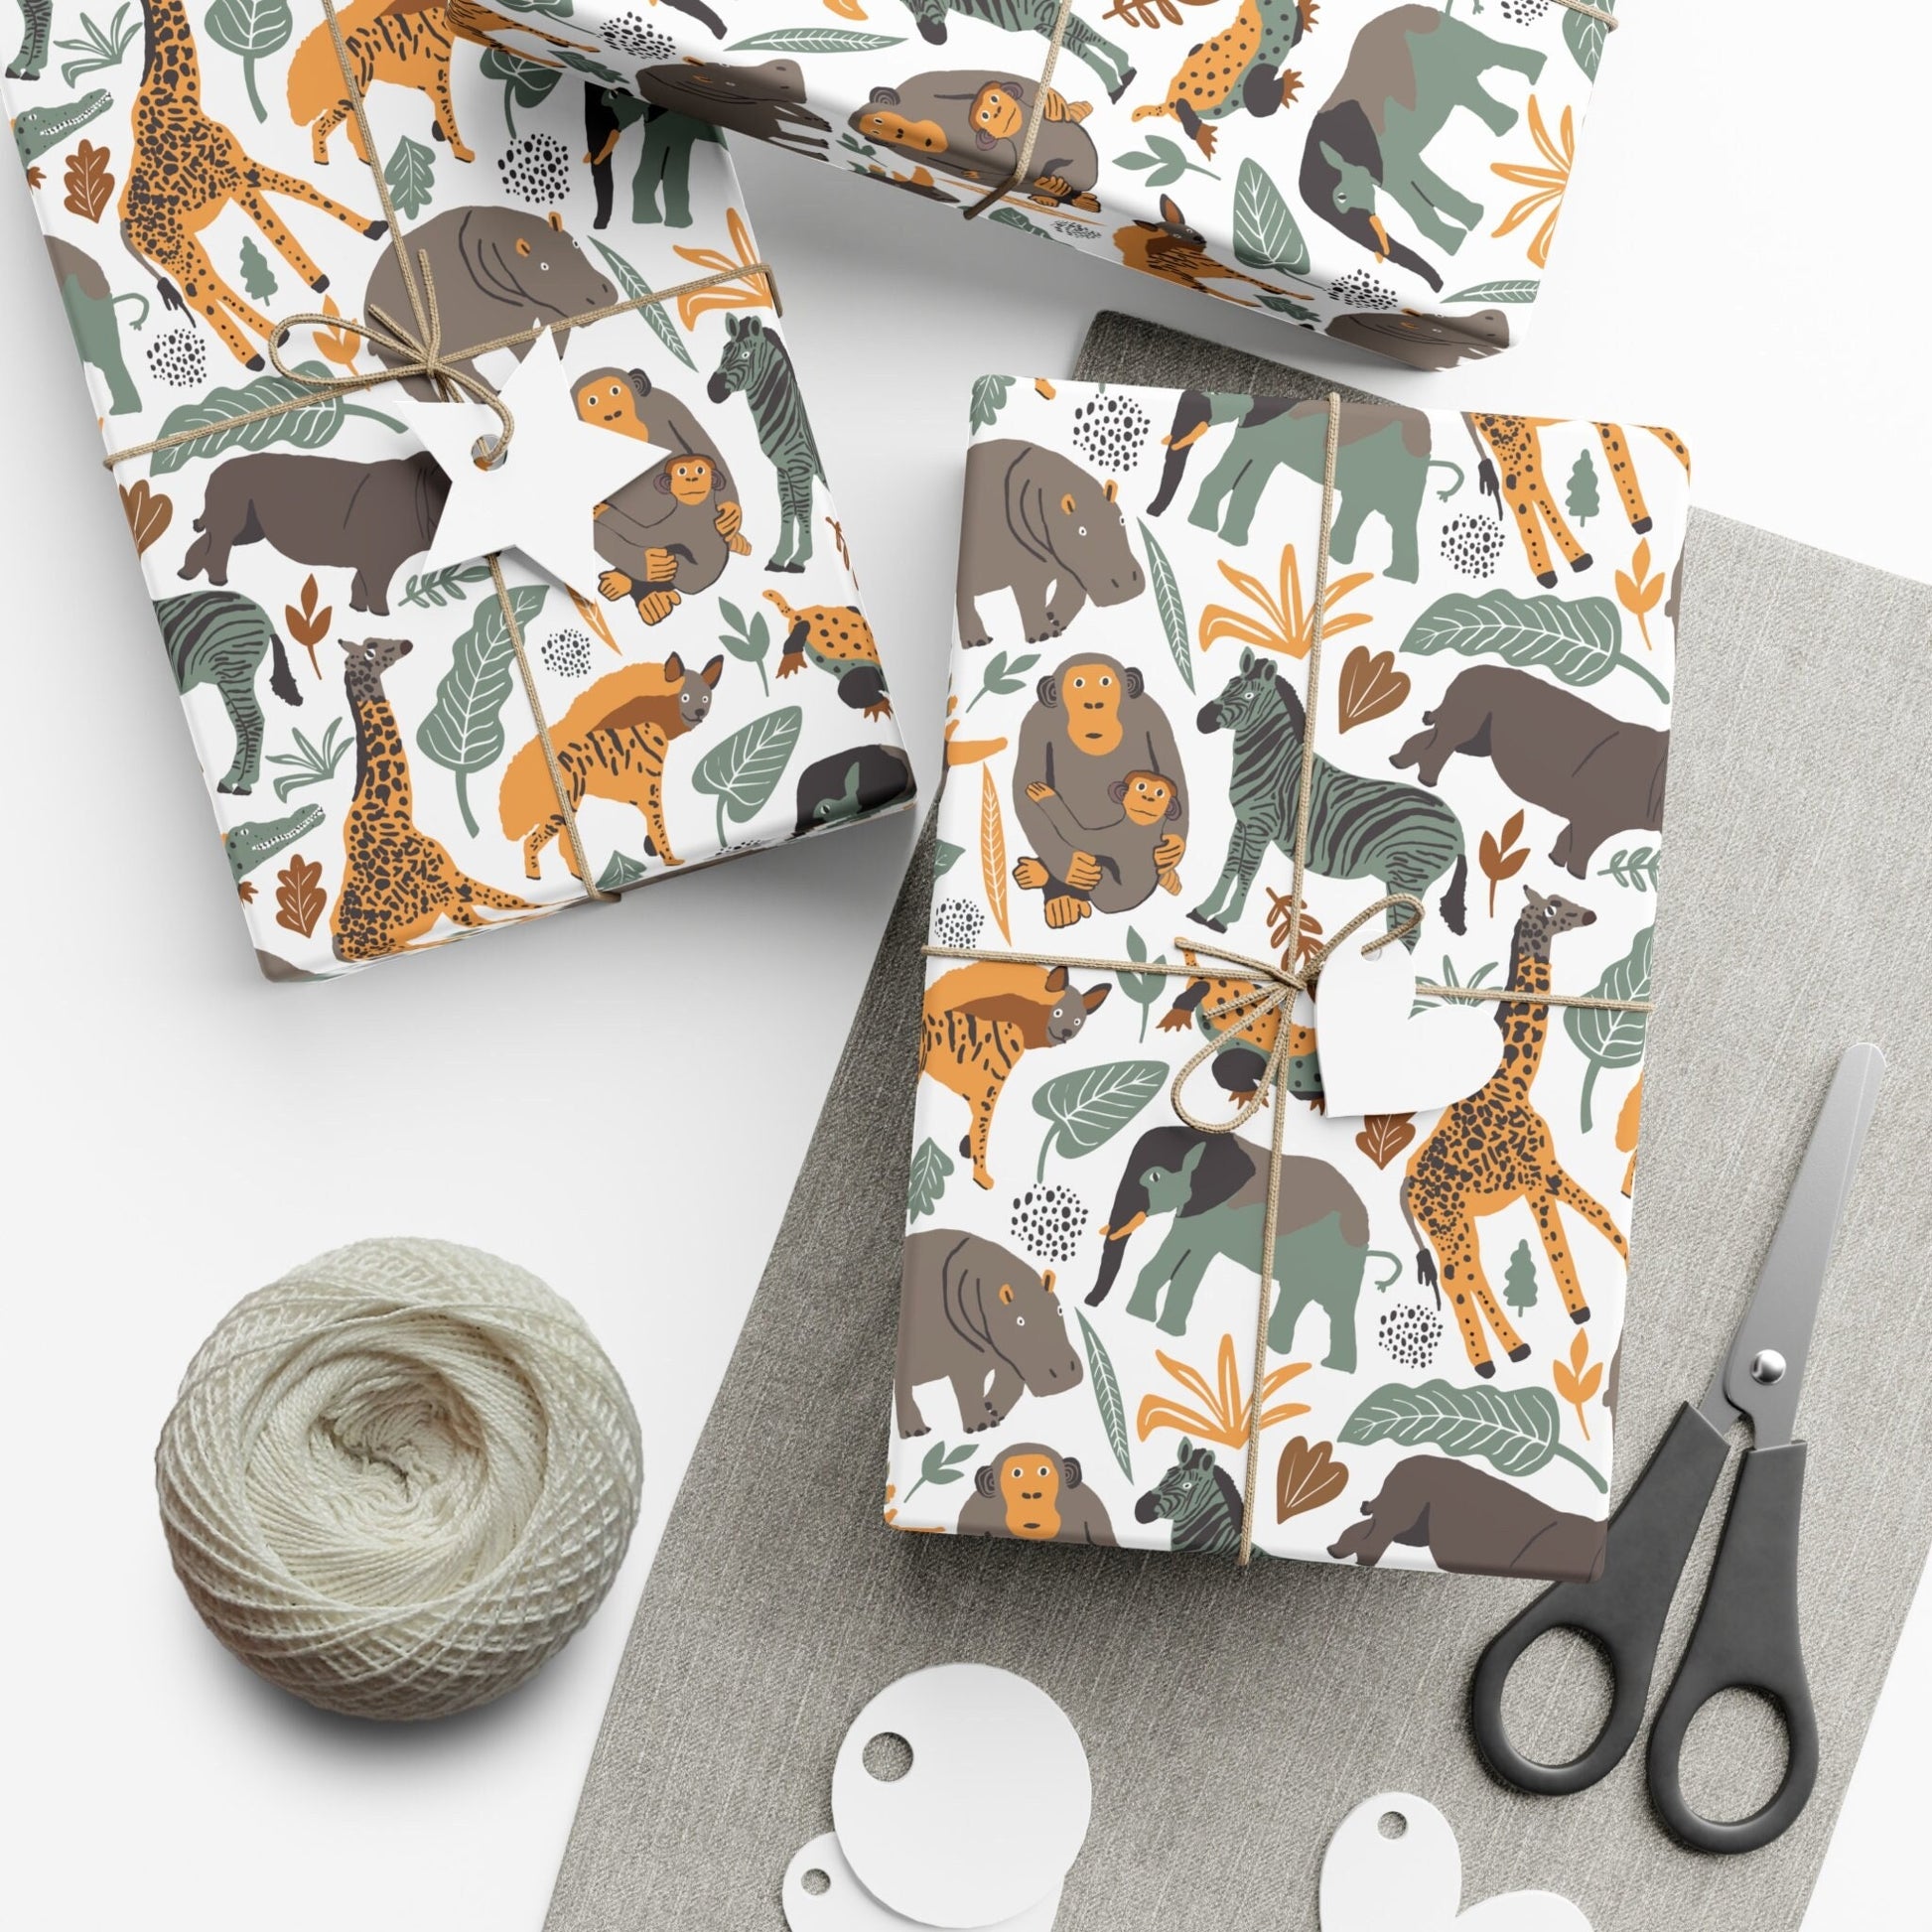 Cute Safari Wrapping Paper, Animal Birthday Wrapping Paper, Amazonian Gift Wrap, Safari Party, Gift Present Paper Roll for Her